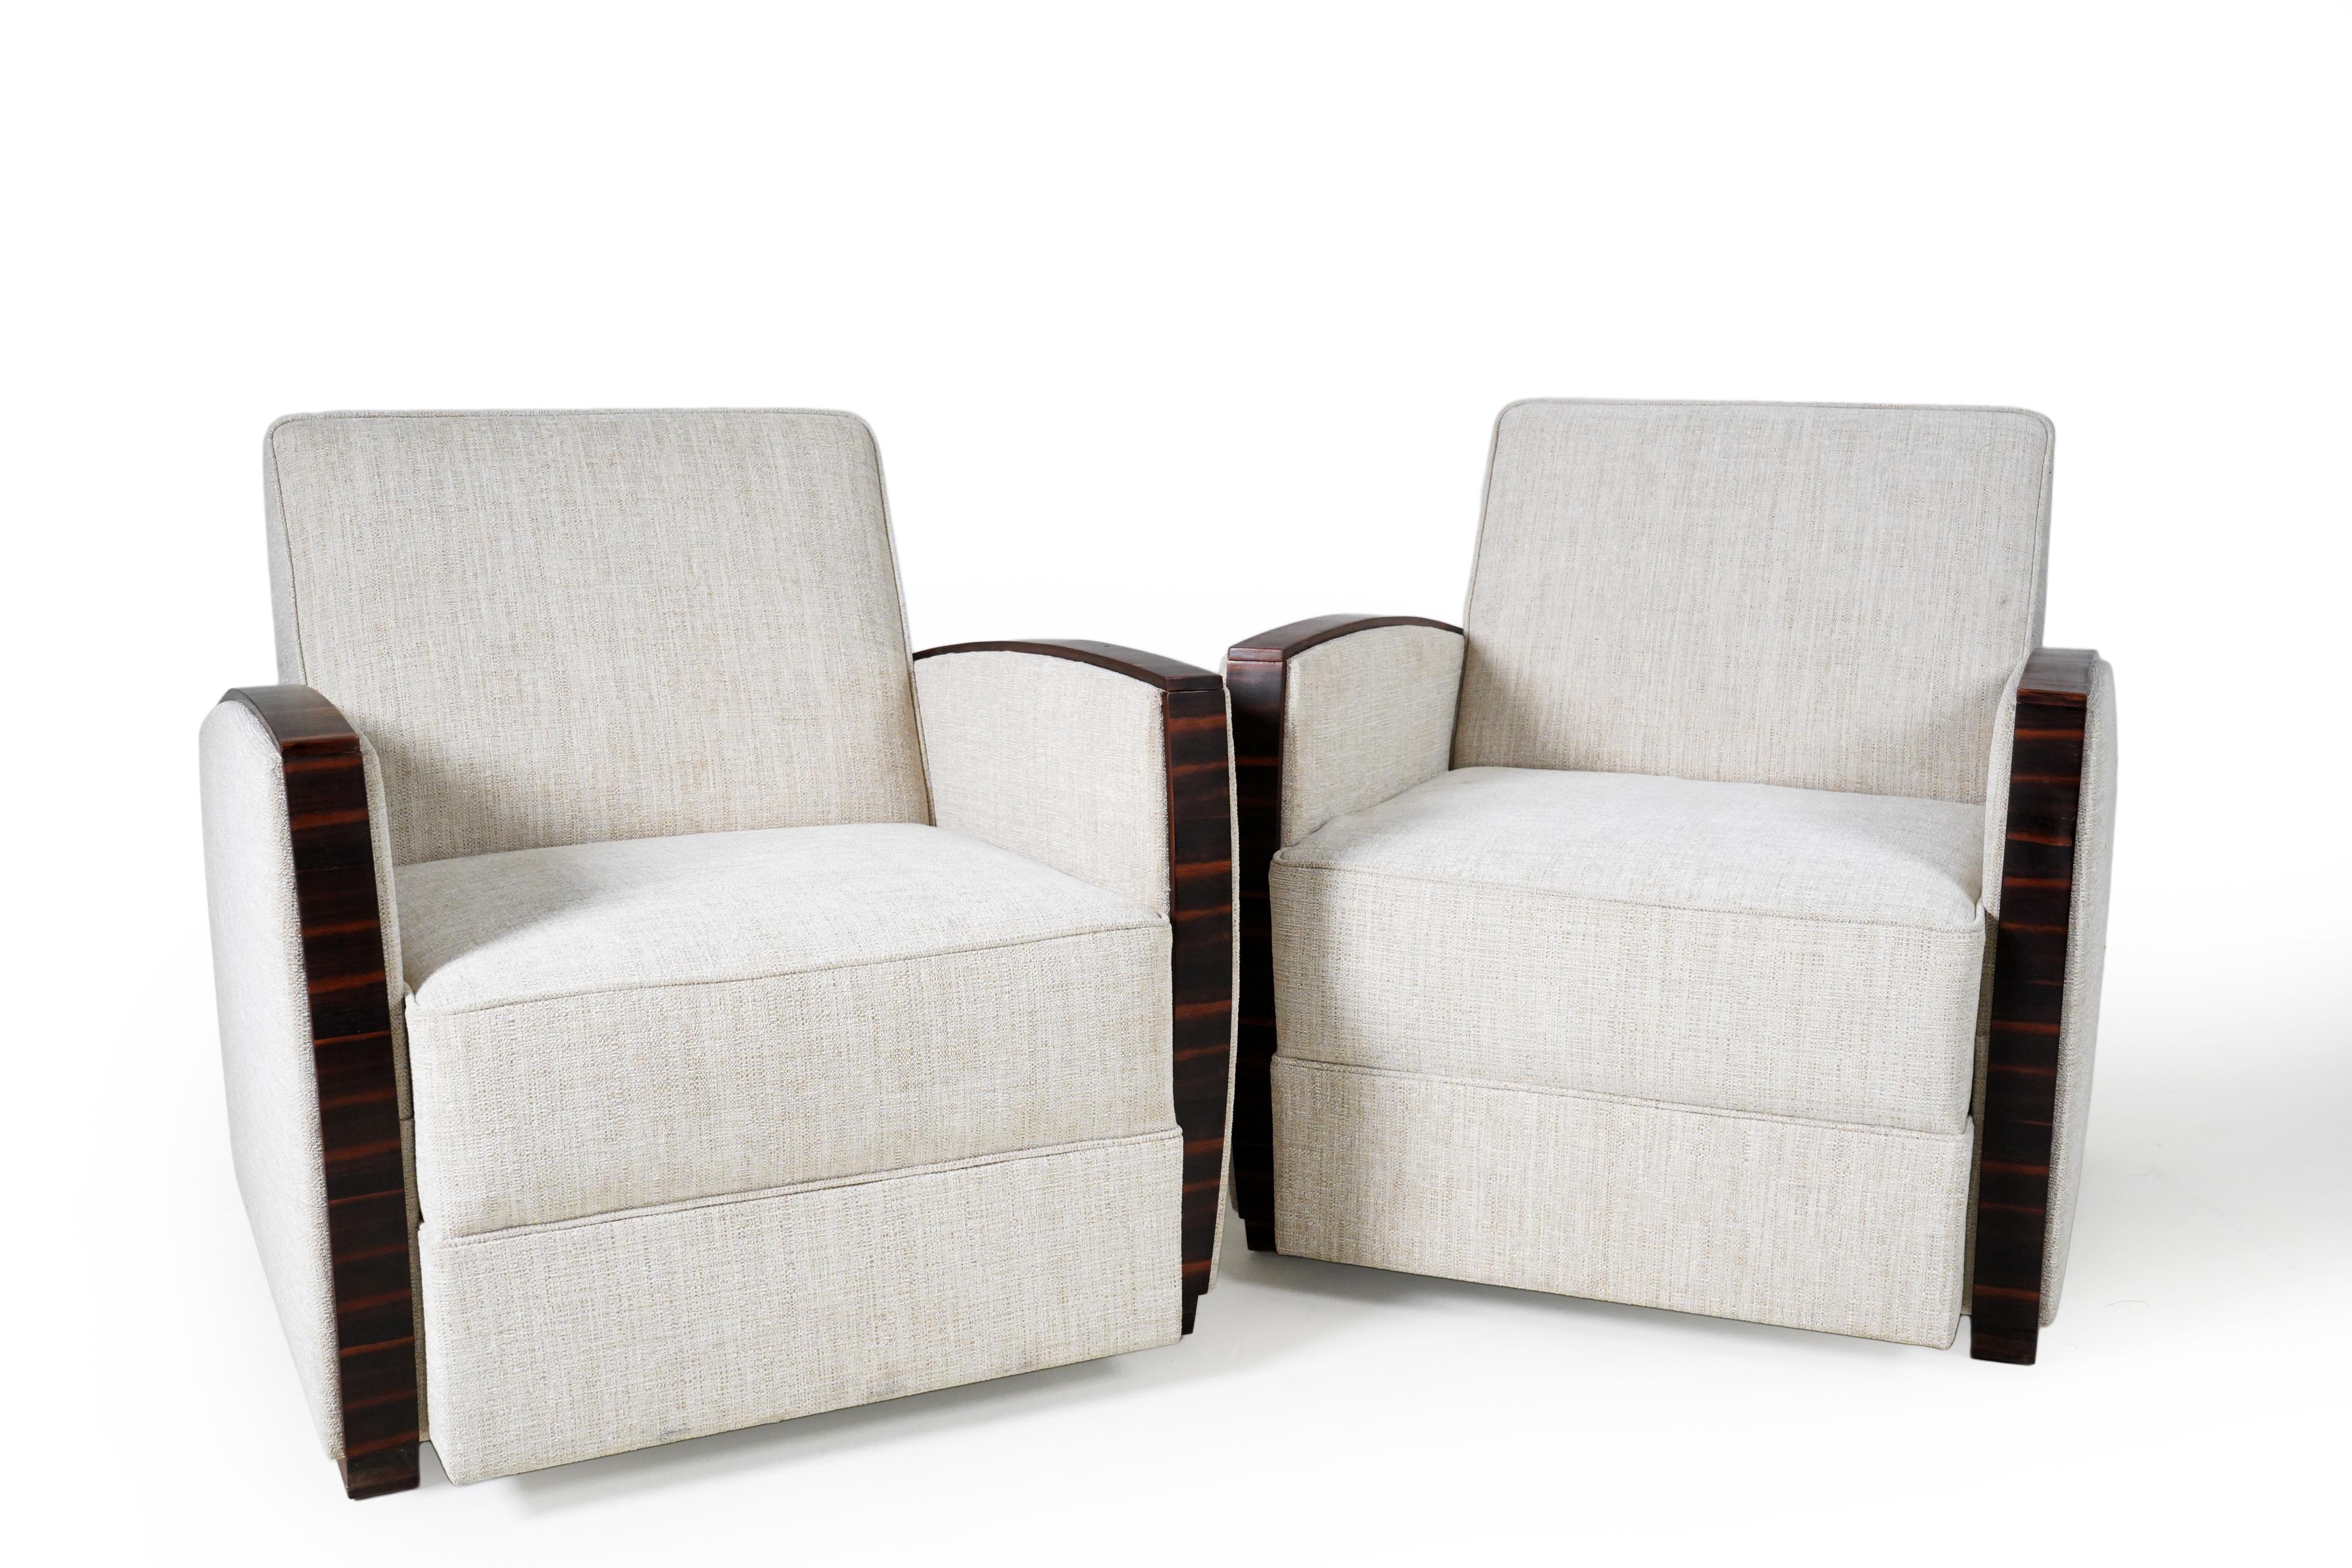 These sculptural and softly voluminous armchairs are modern copies of 1930's Hungarian originals. The rich walnut veneer provides a sleek accent to the plush upholstered seats and exterior surfaces. These chairs are comfortable and substantial